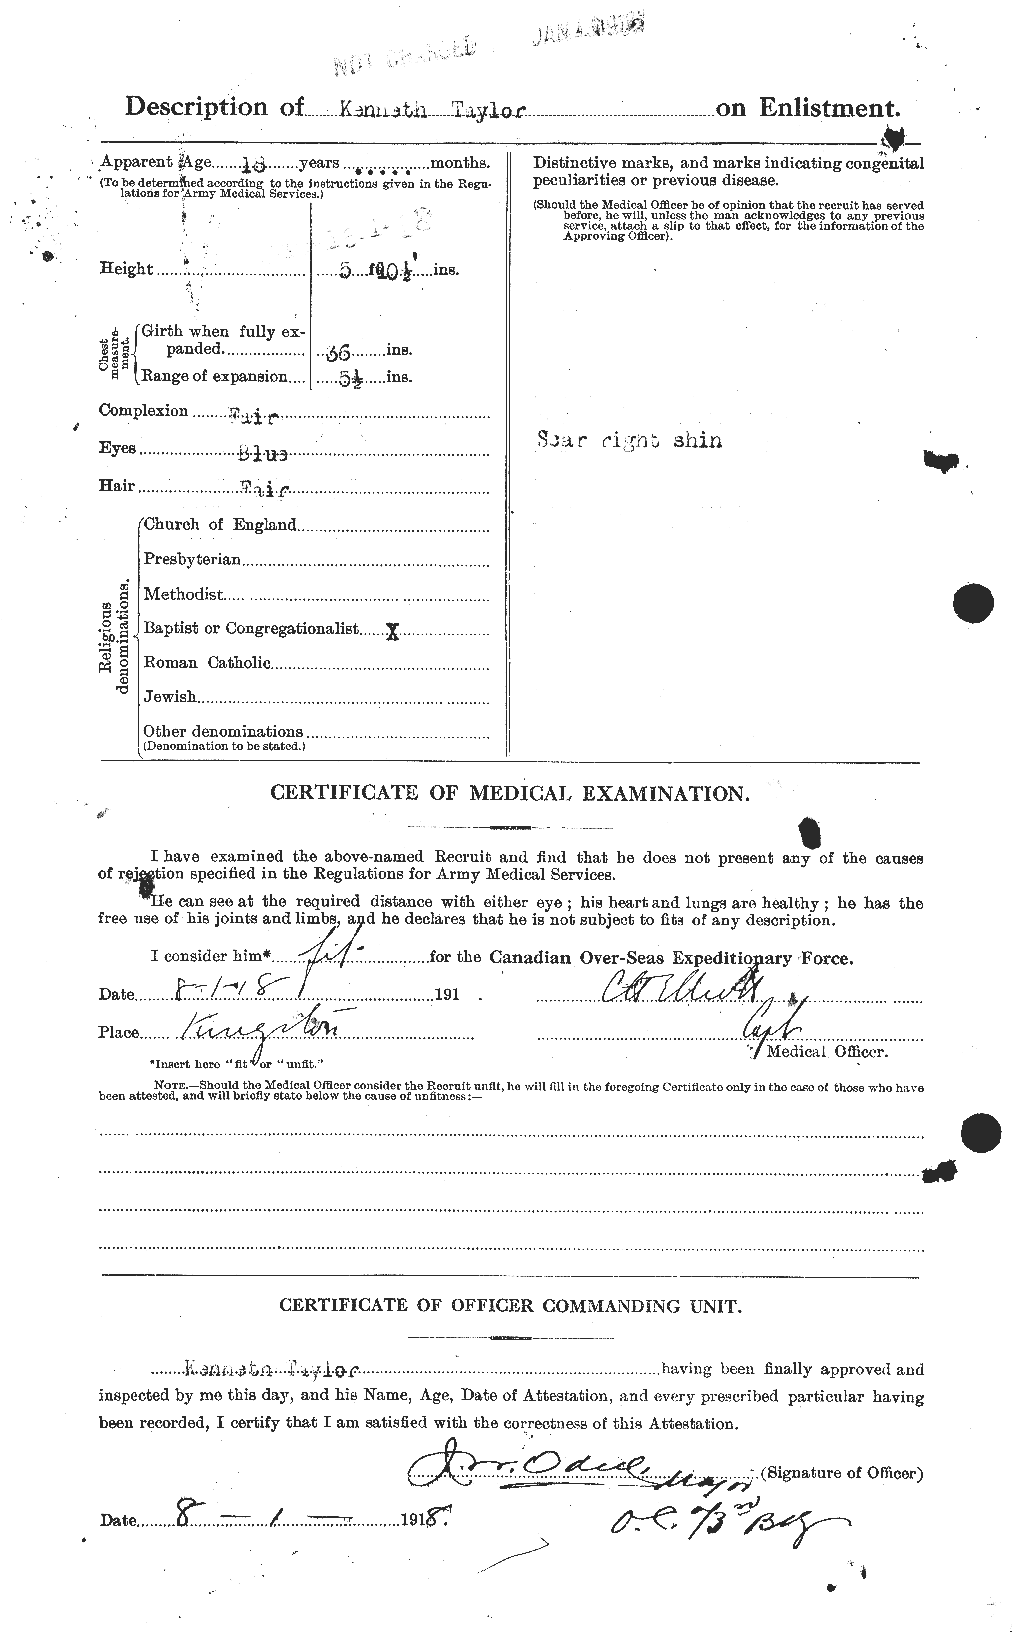 Personnel Records of the First World War - CEF 627594b